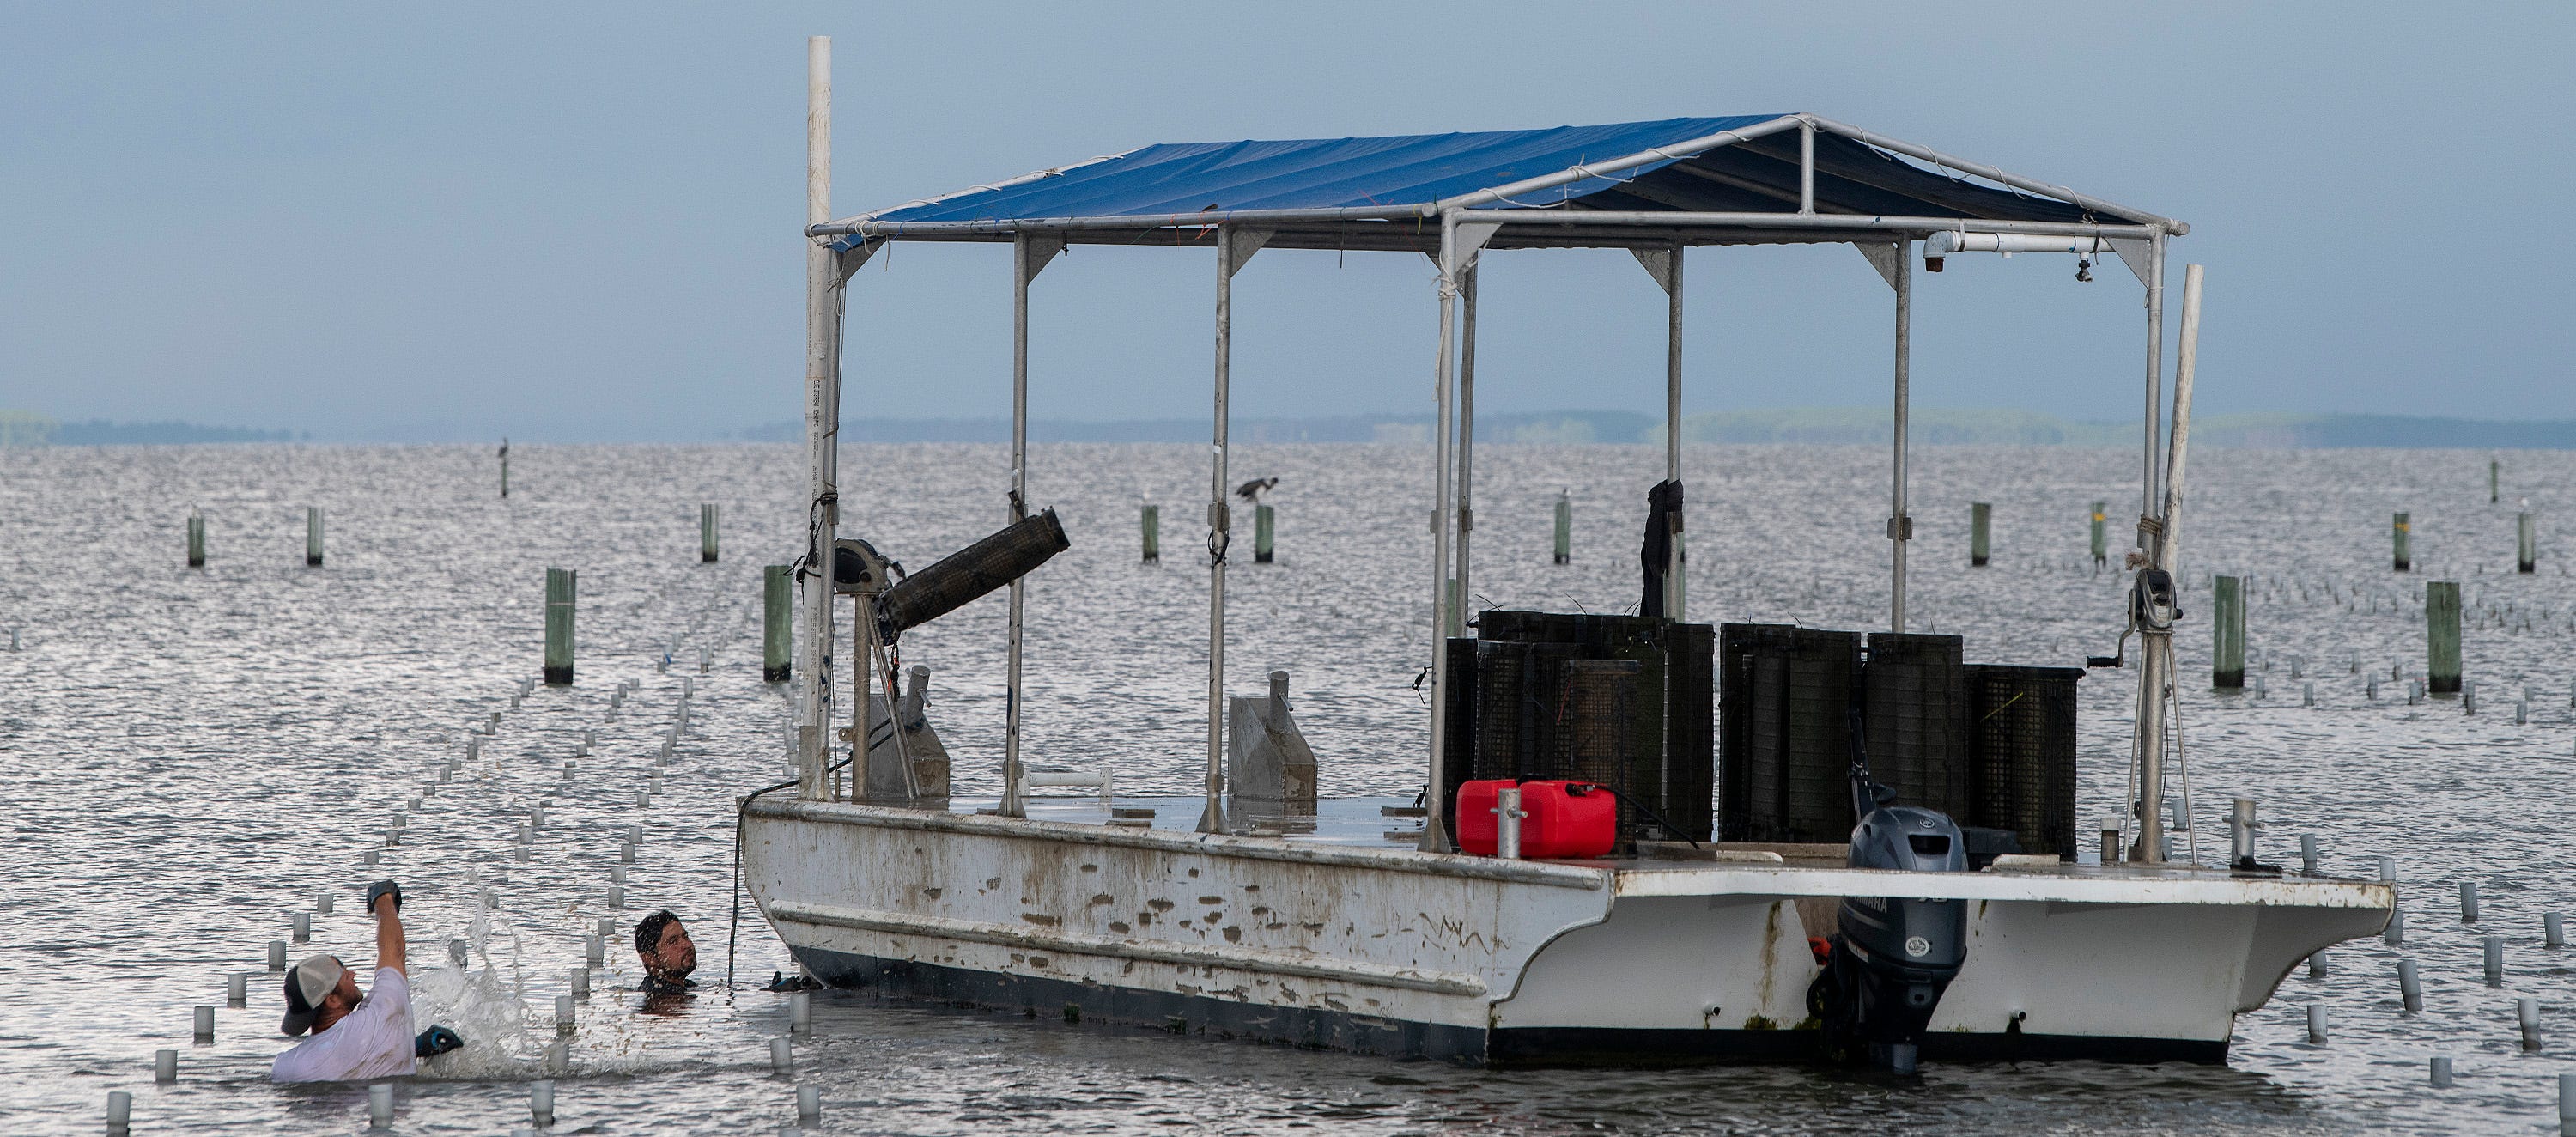 Eric Stewart, left, and Chuy Hernandez pull oyster baskets from the water at Murder Point Oysters on Sandy Bay near Bayou La Batre, Ala., on Tuesday September 10, 2019.